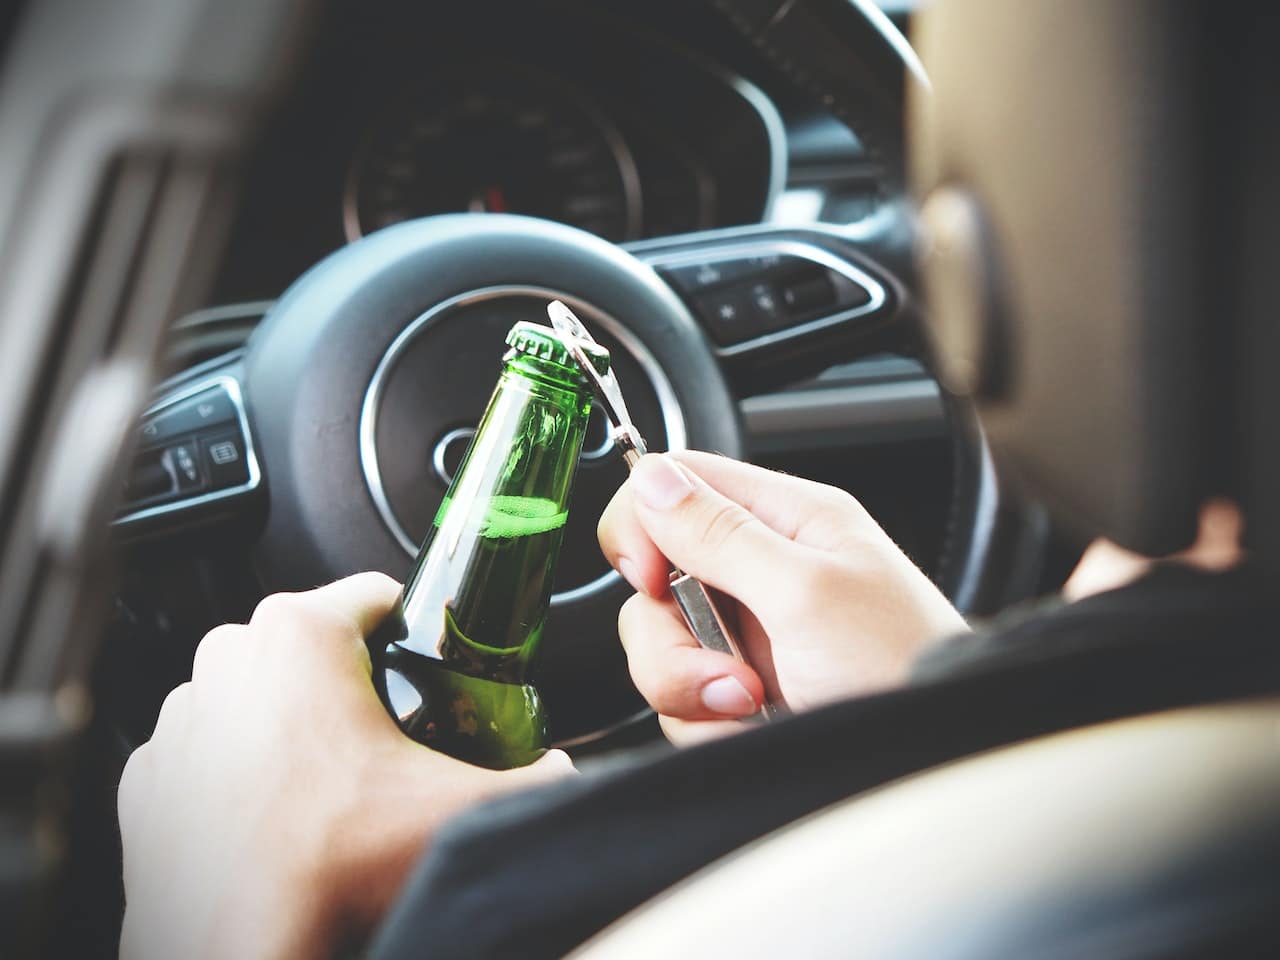 opening a beer bottle while behind the wheel